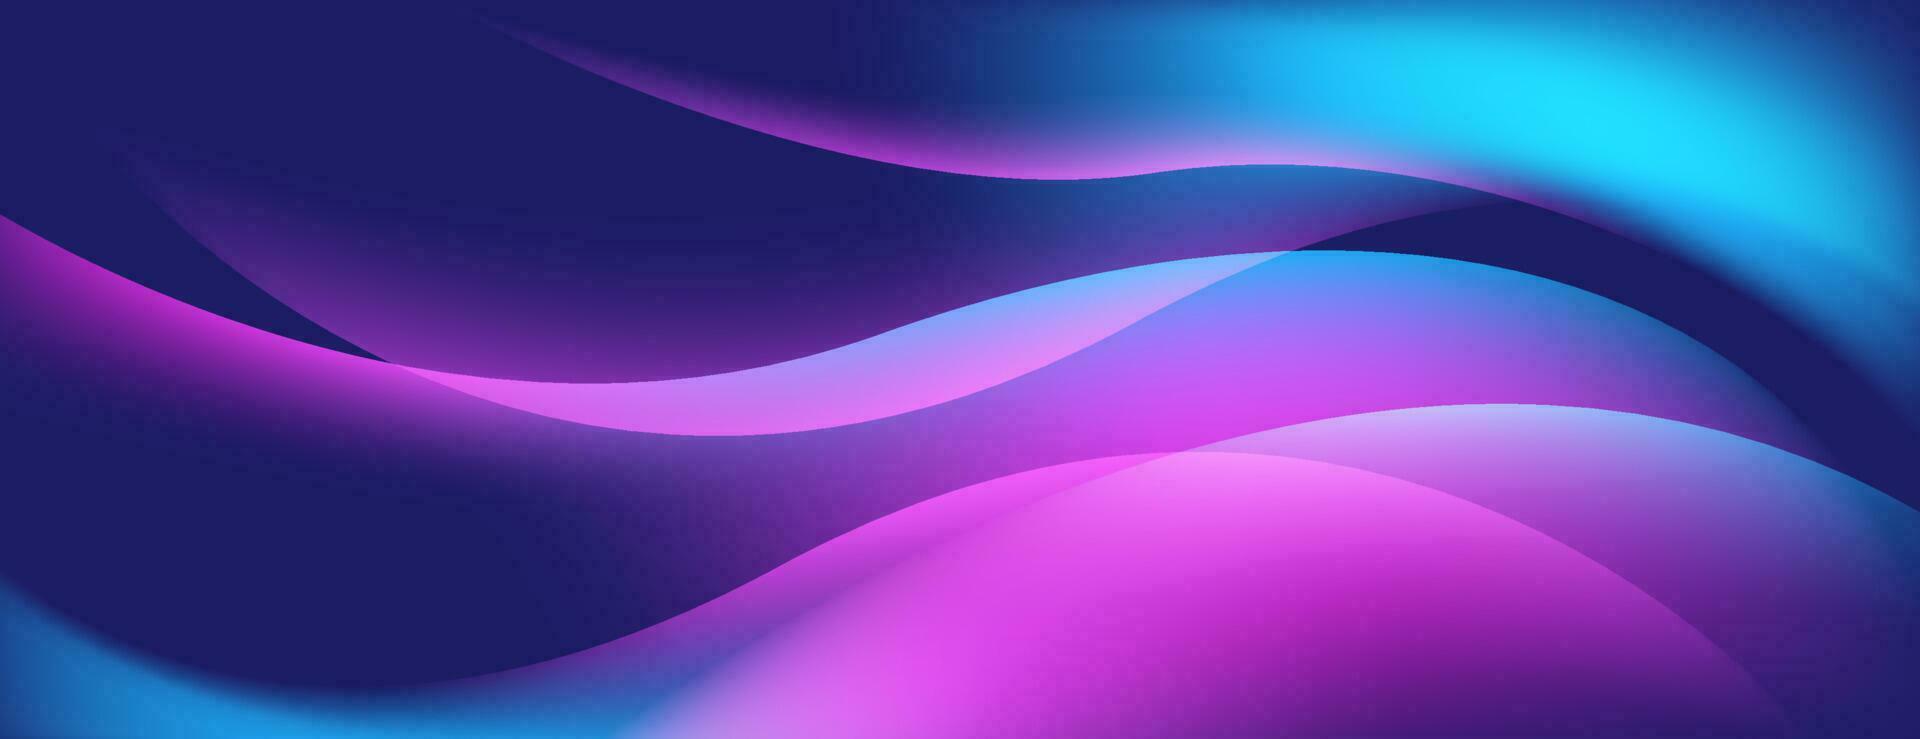 Neon wave abstract background, dynamic wave and light motion background. Vector design template